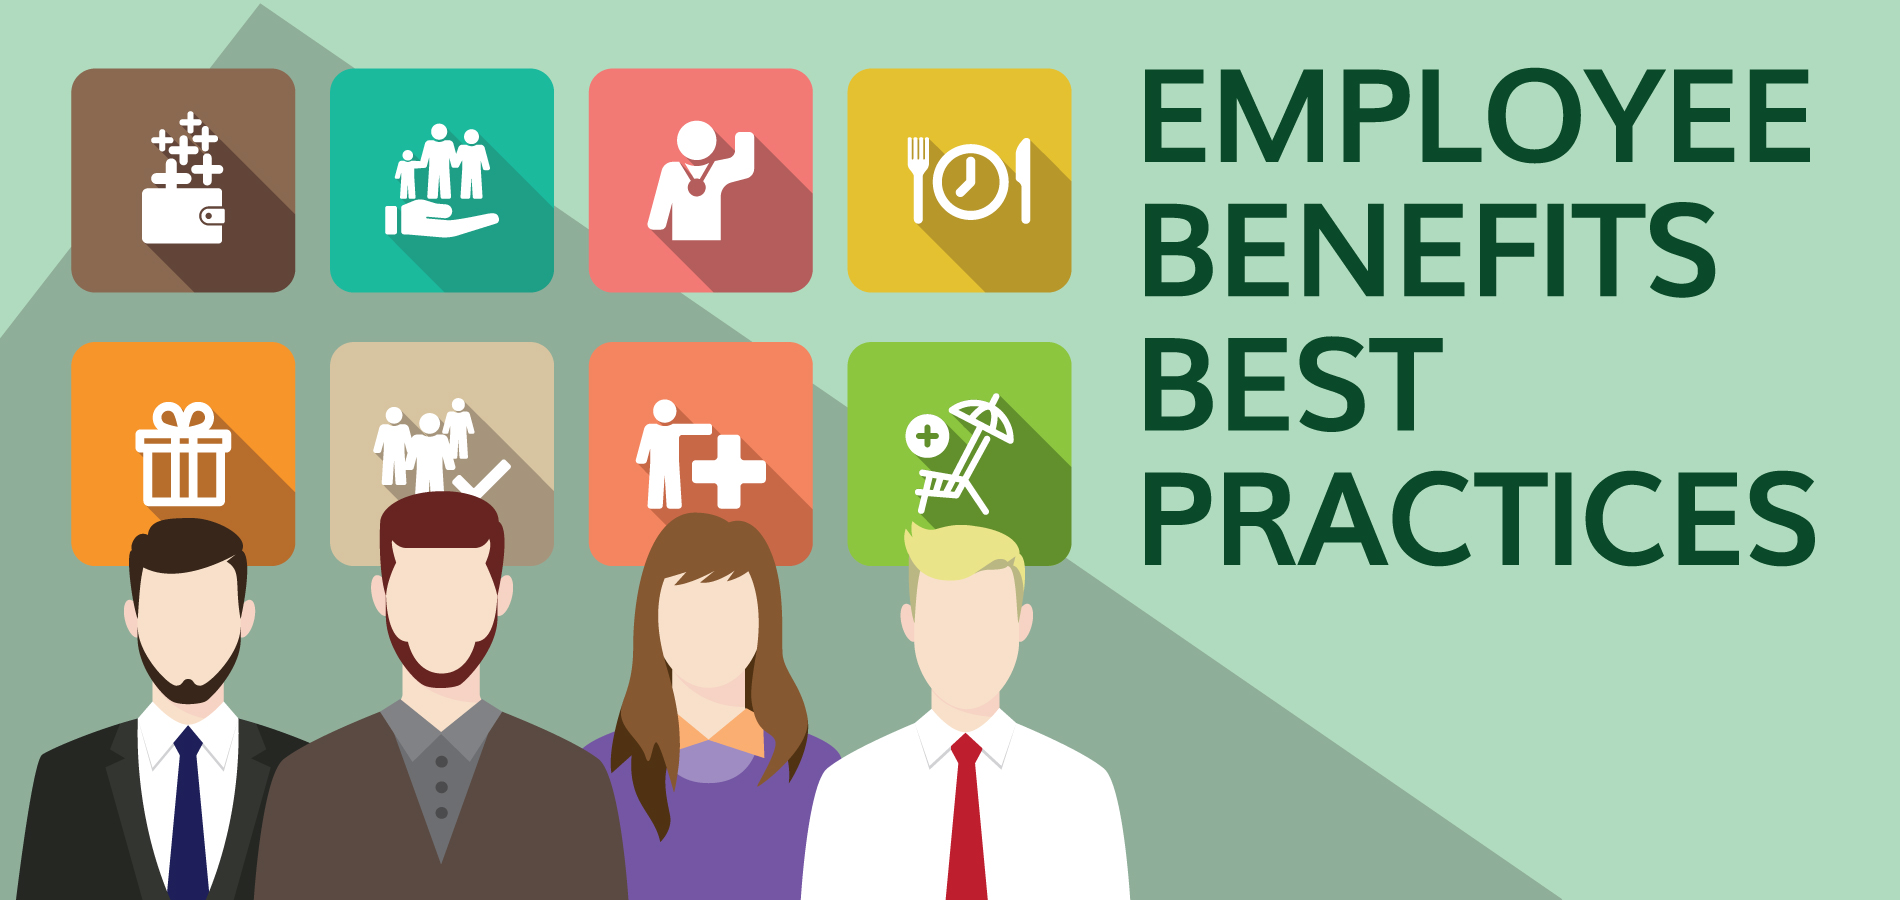 10 Employee Benefits Best Practices to win over your employees